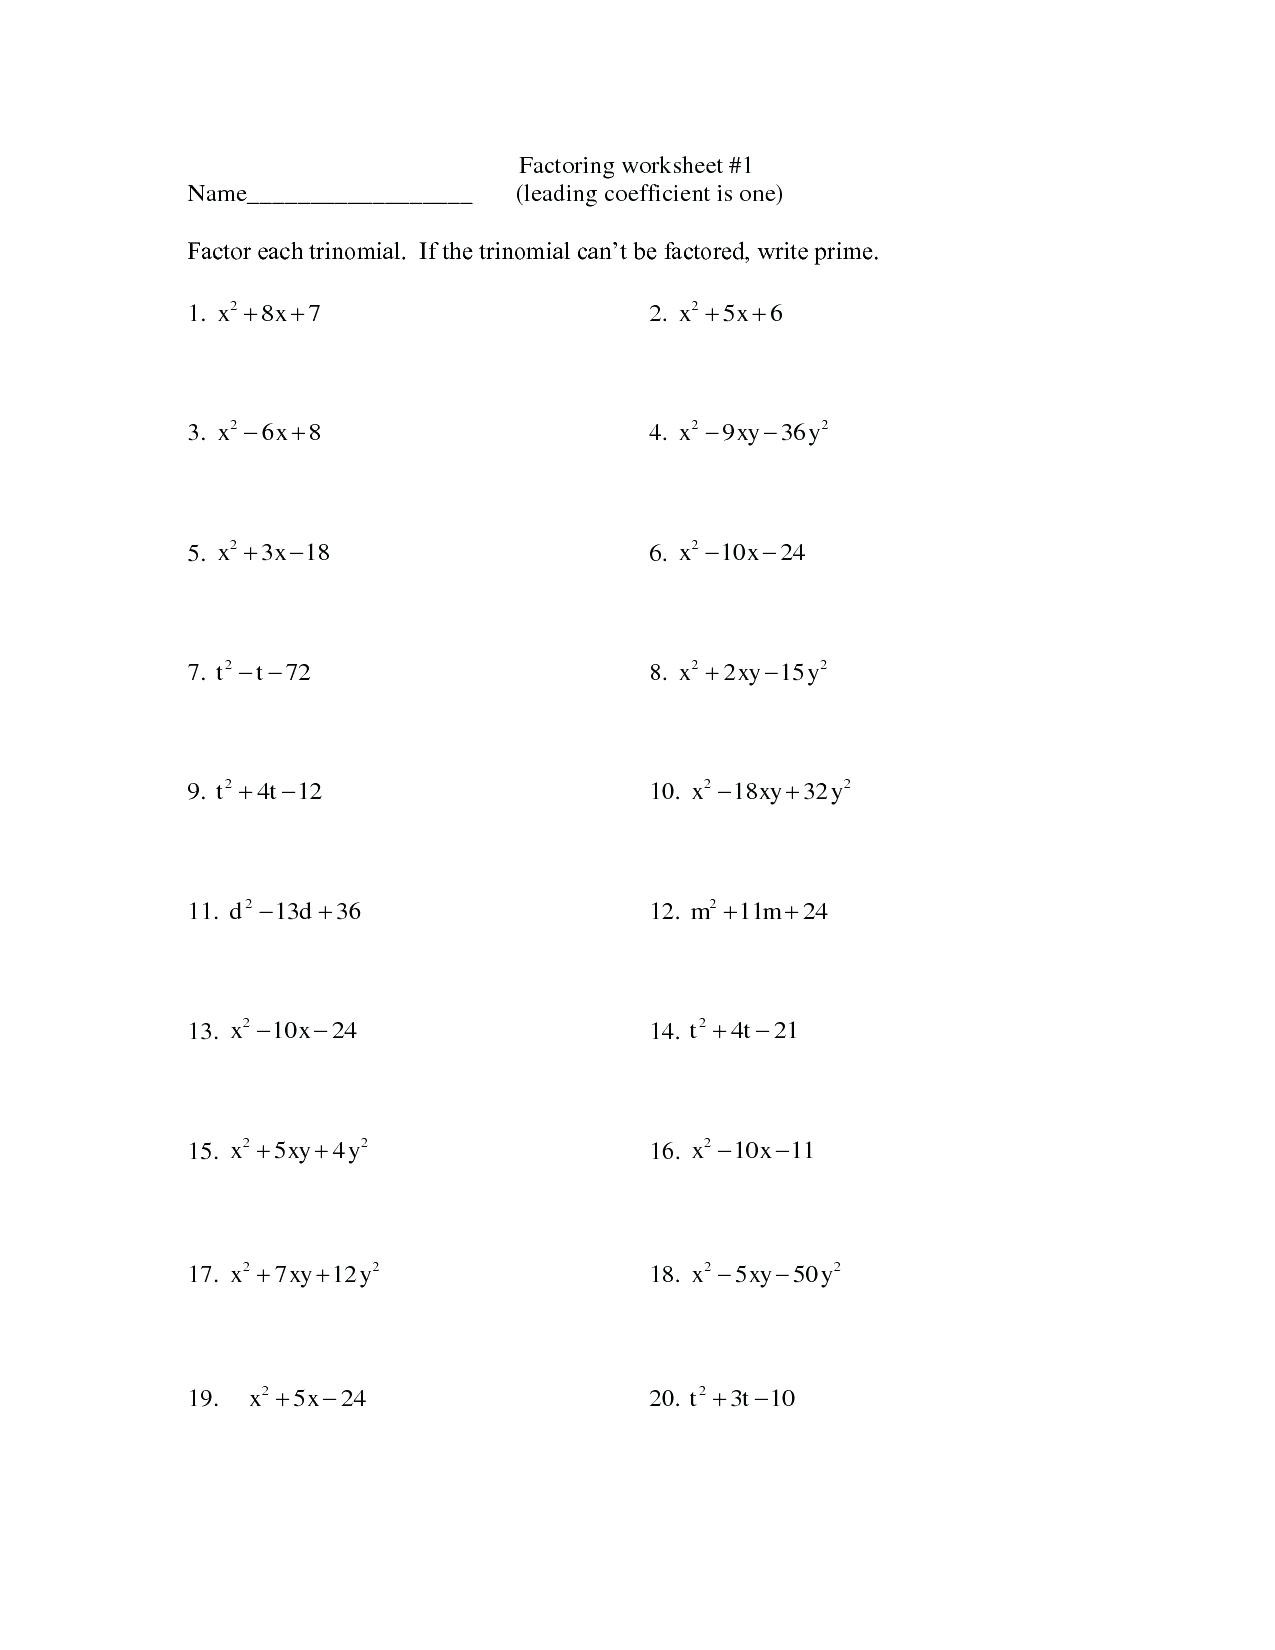 Factoring Trinomials Worksheet Answers Factoring Trinomials Worksheet A 1 Nidecmege